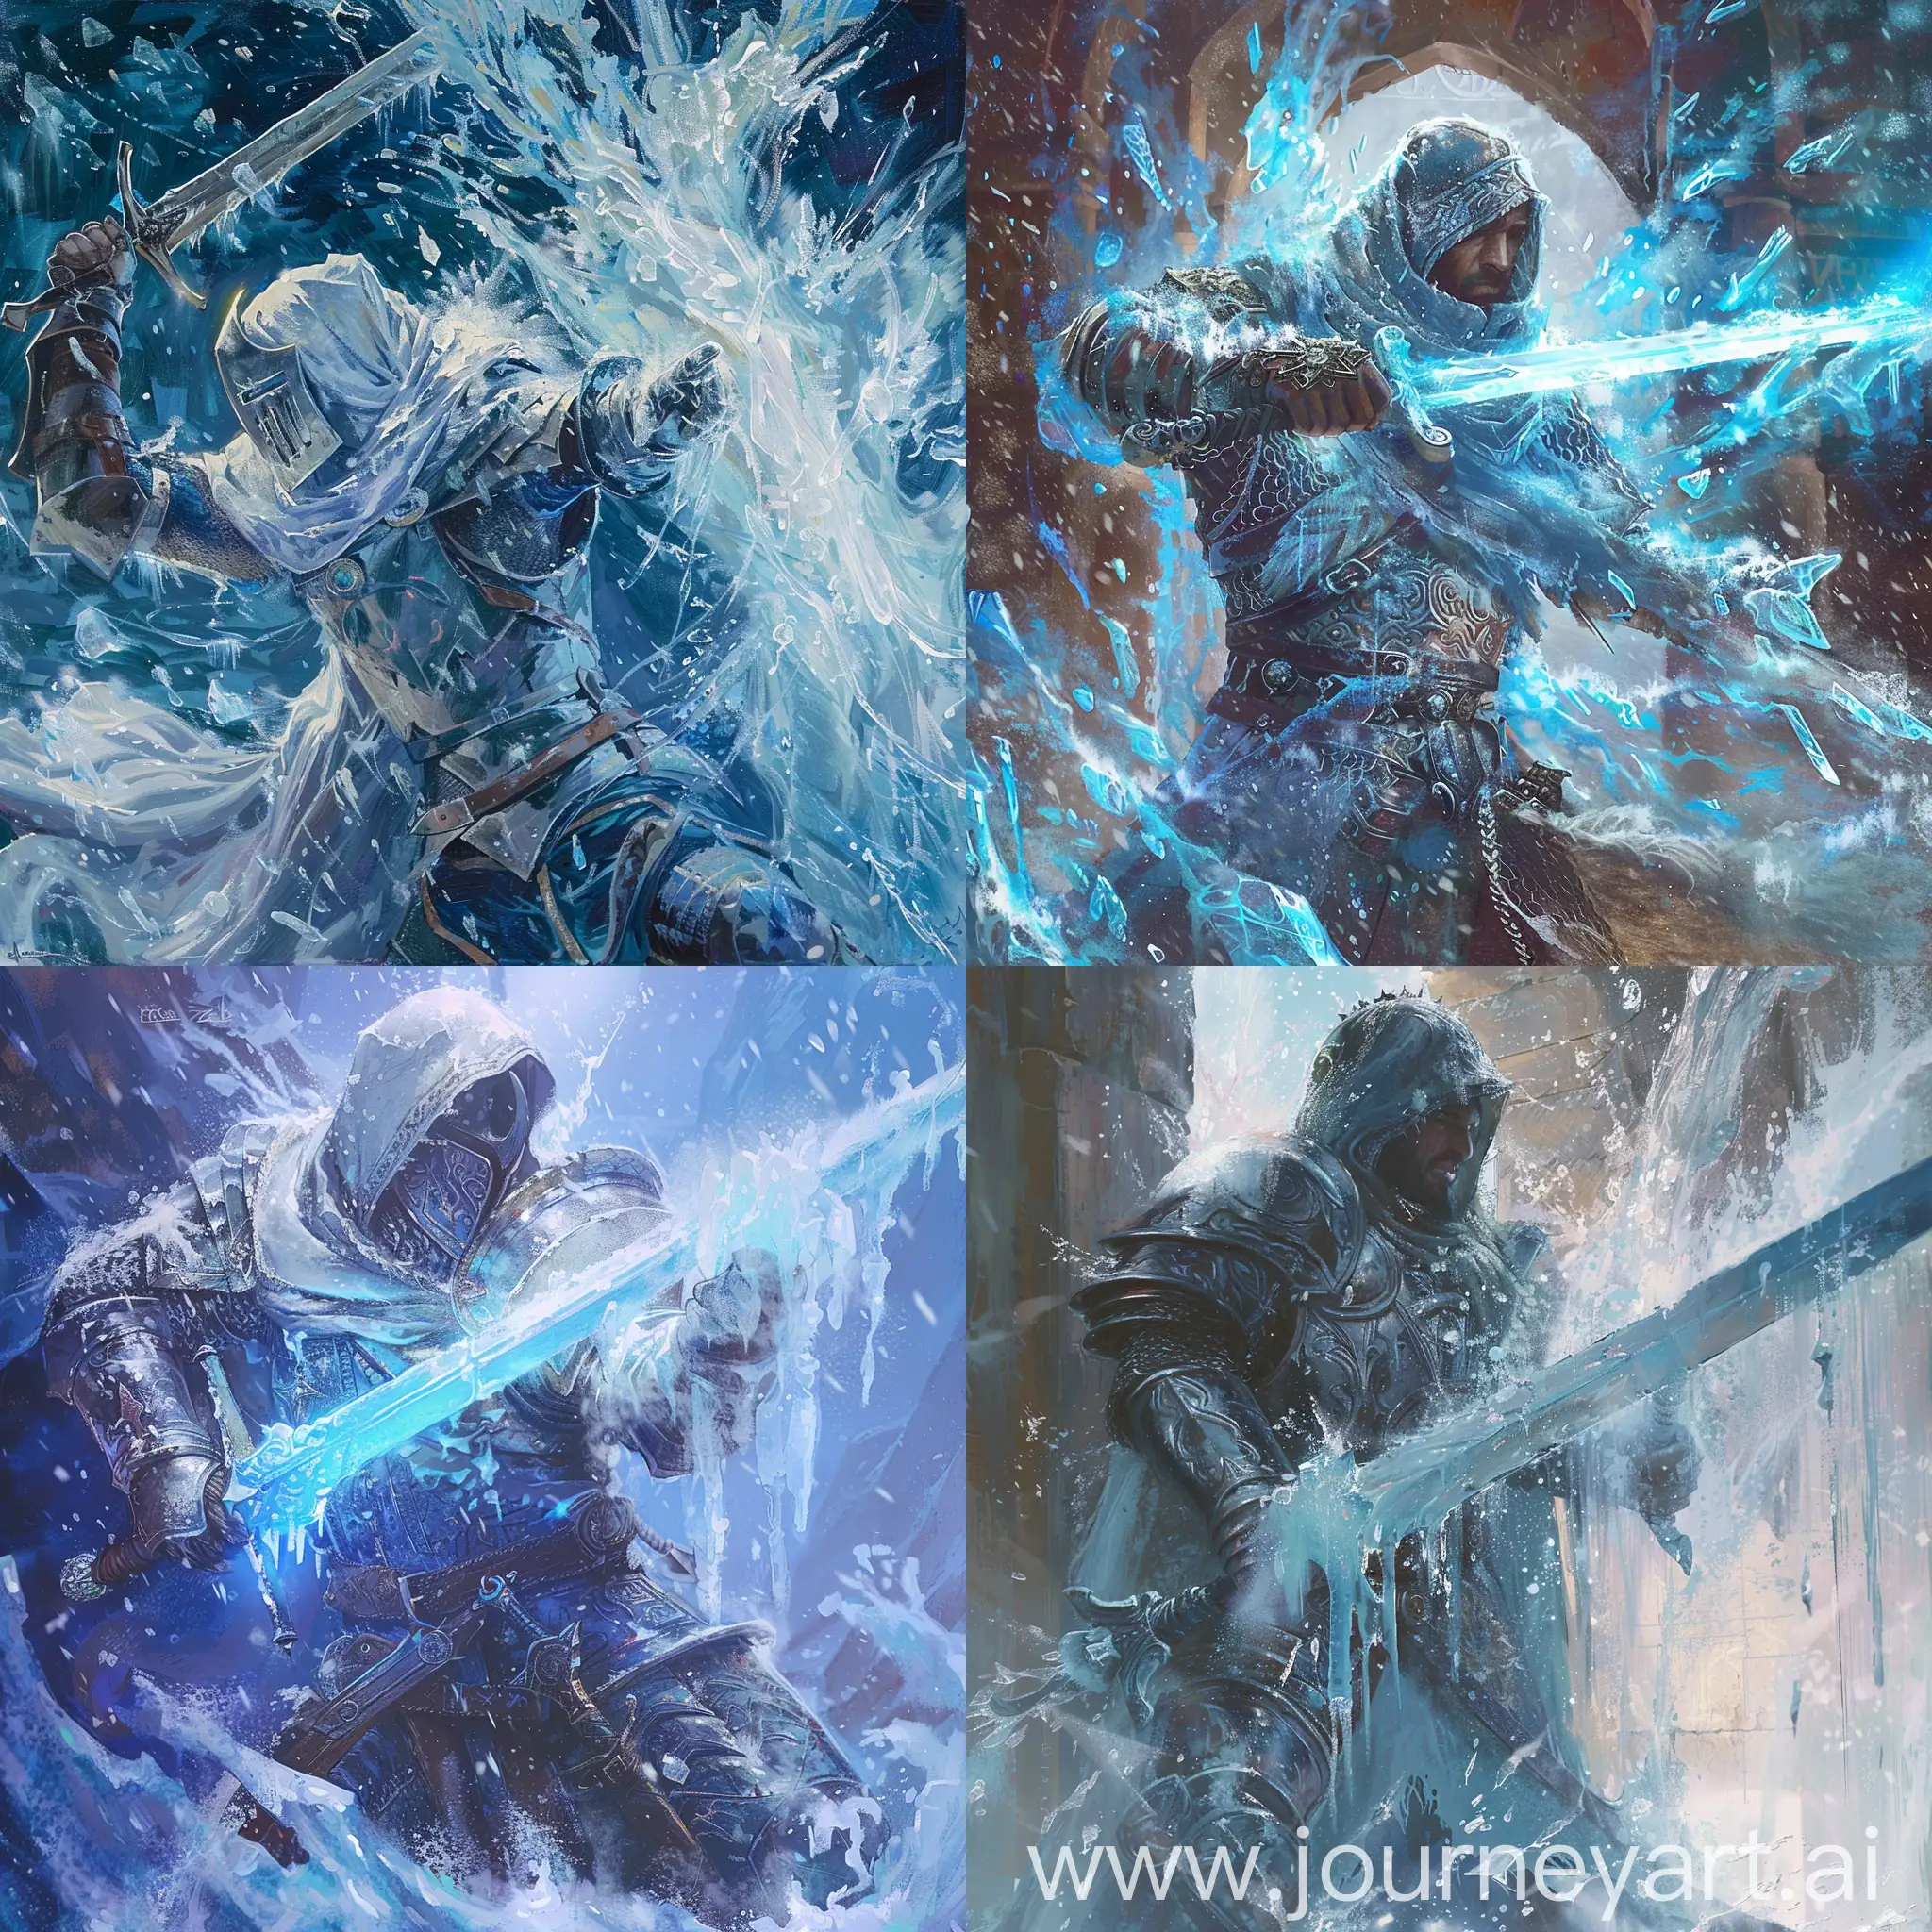 Battle Mage freezing an Arabian knight in solid ice with ice magic.
In the art style of Terese Nielsen oil painting.